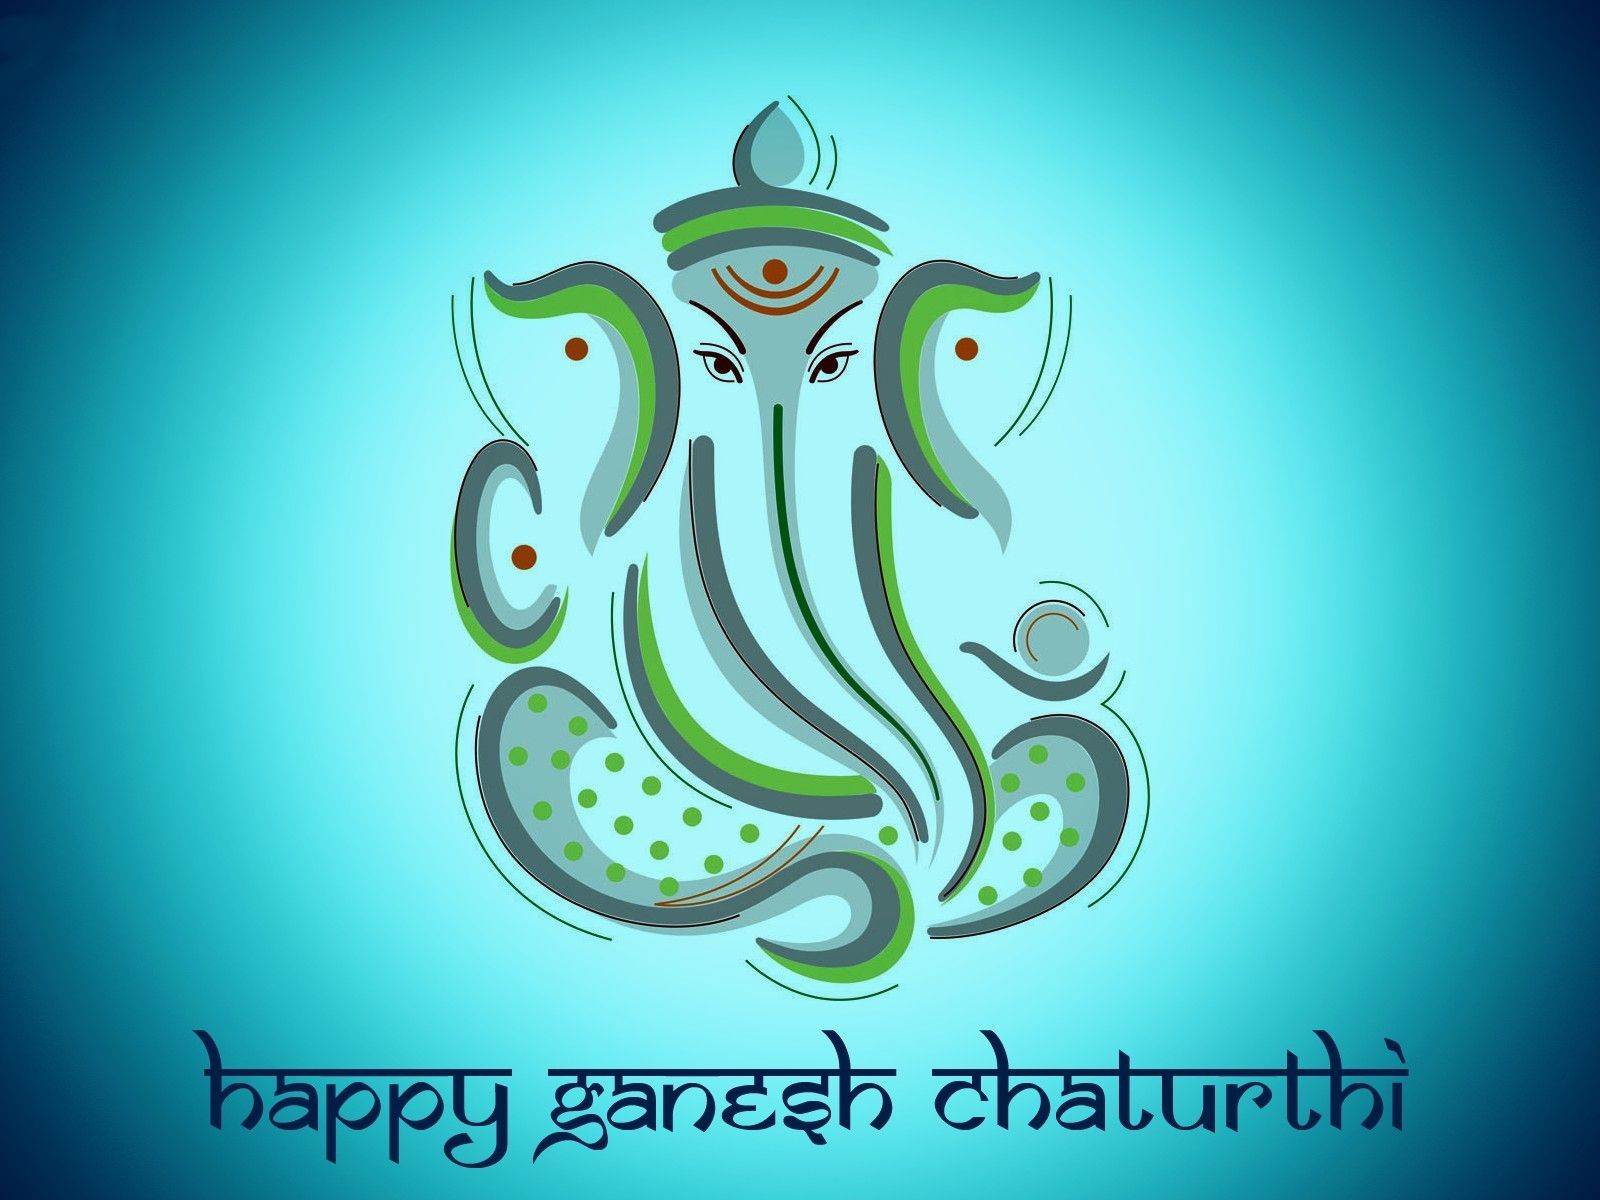 Ganesh chaturthi hd wallpapers latest photoshoots beautiful images and more for â happy ganesh chaturthi happy ganesh chaturthi images ganesh chaturthi photos